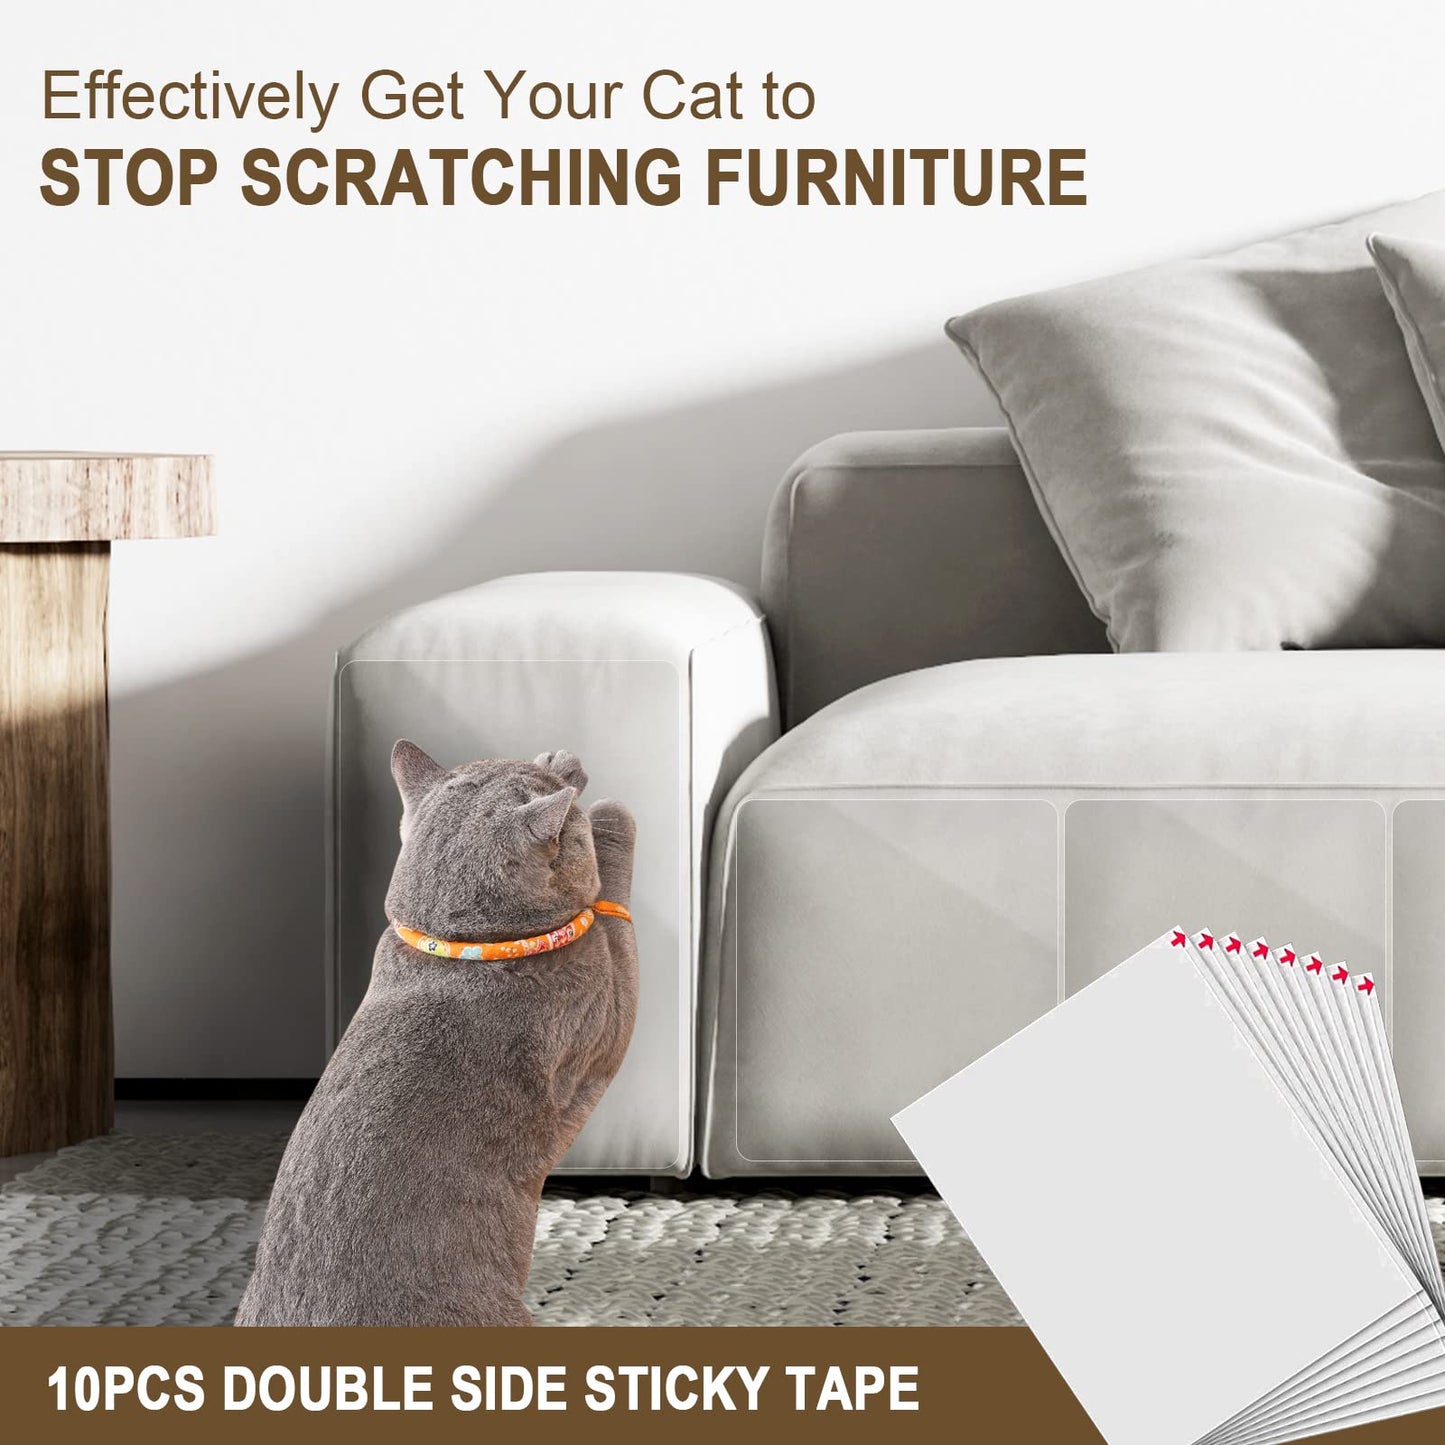 HappyFreeSX Anti Cat Scratch Furniture Protectors from Cats, 10 Pcs Cat Scratch Deterrent Tape, Corner Couch Protector for Cats, Double Sided Sofa Anti Scratching Sticky Tape, Sticky Paws Cat Training